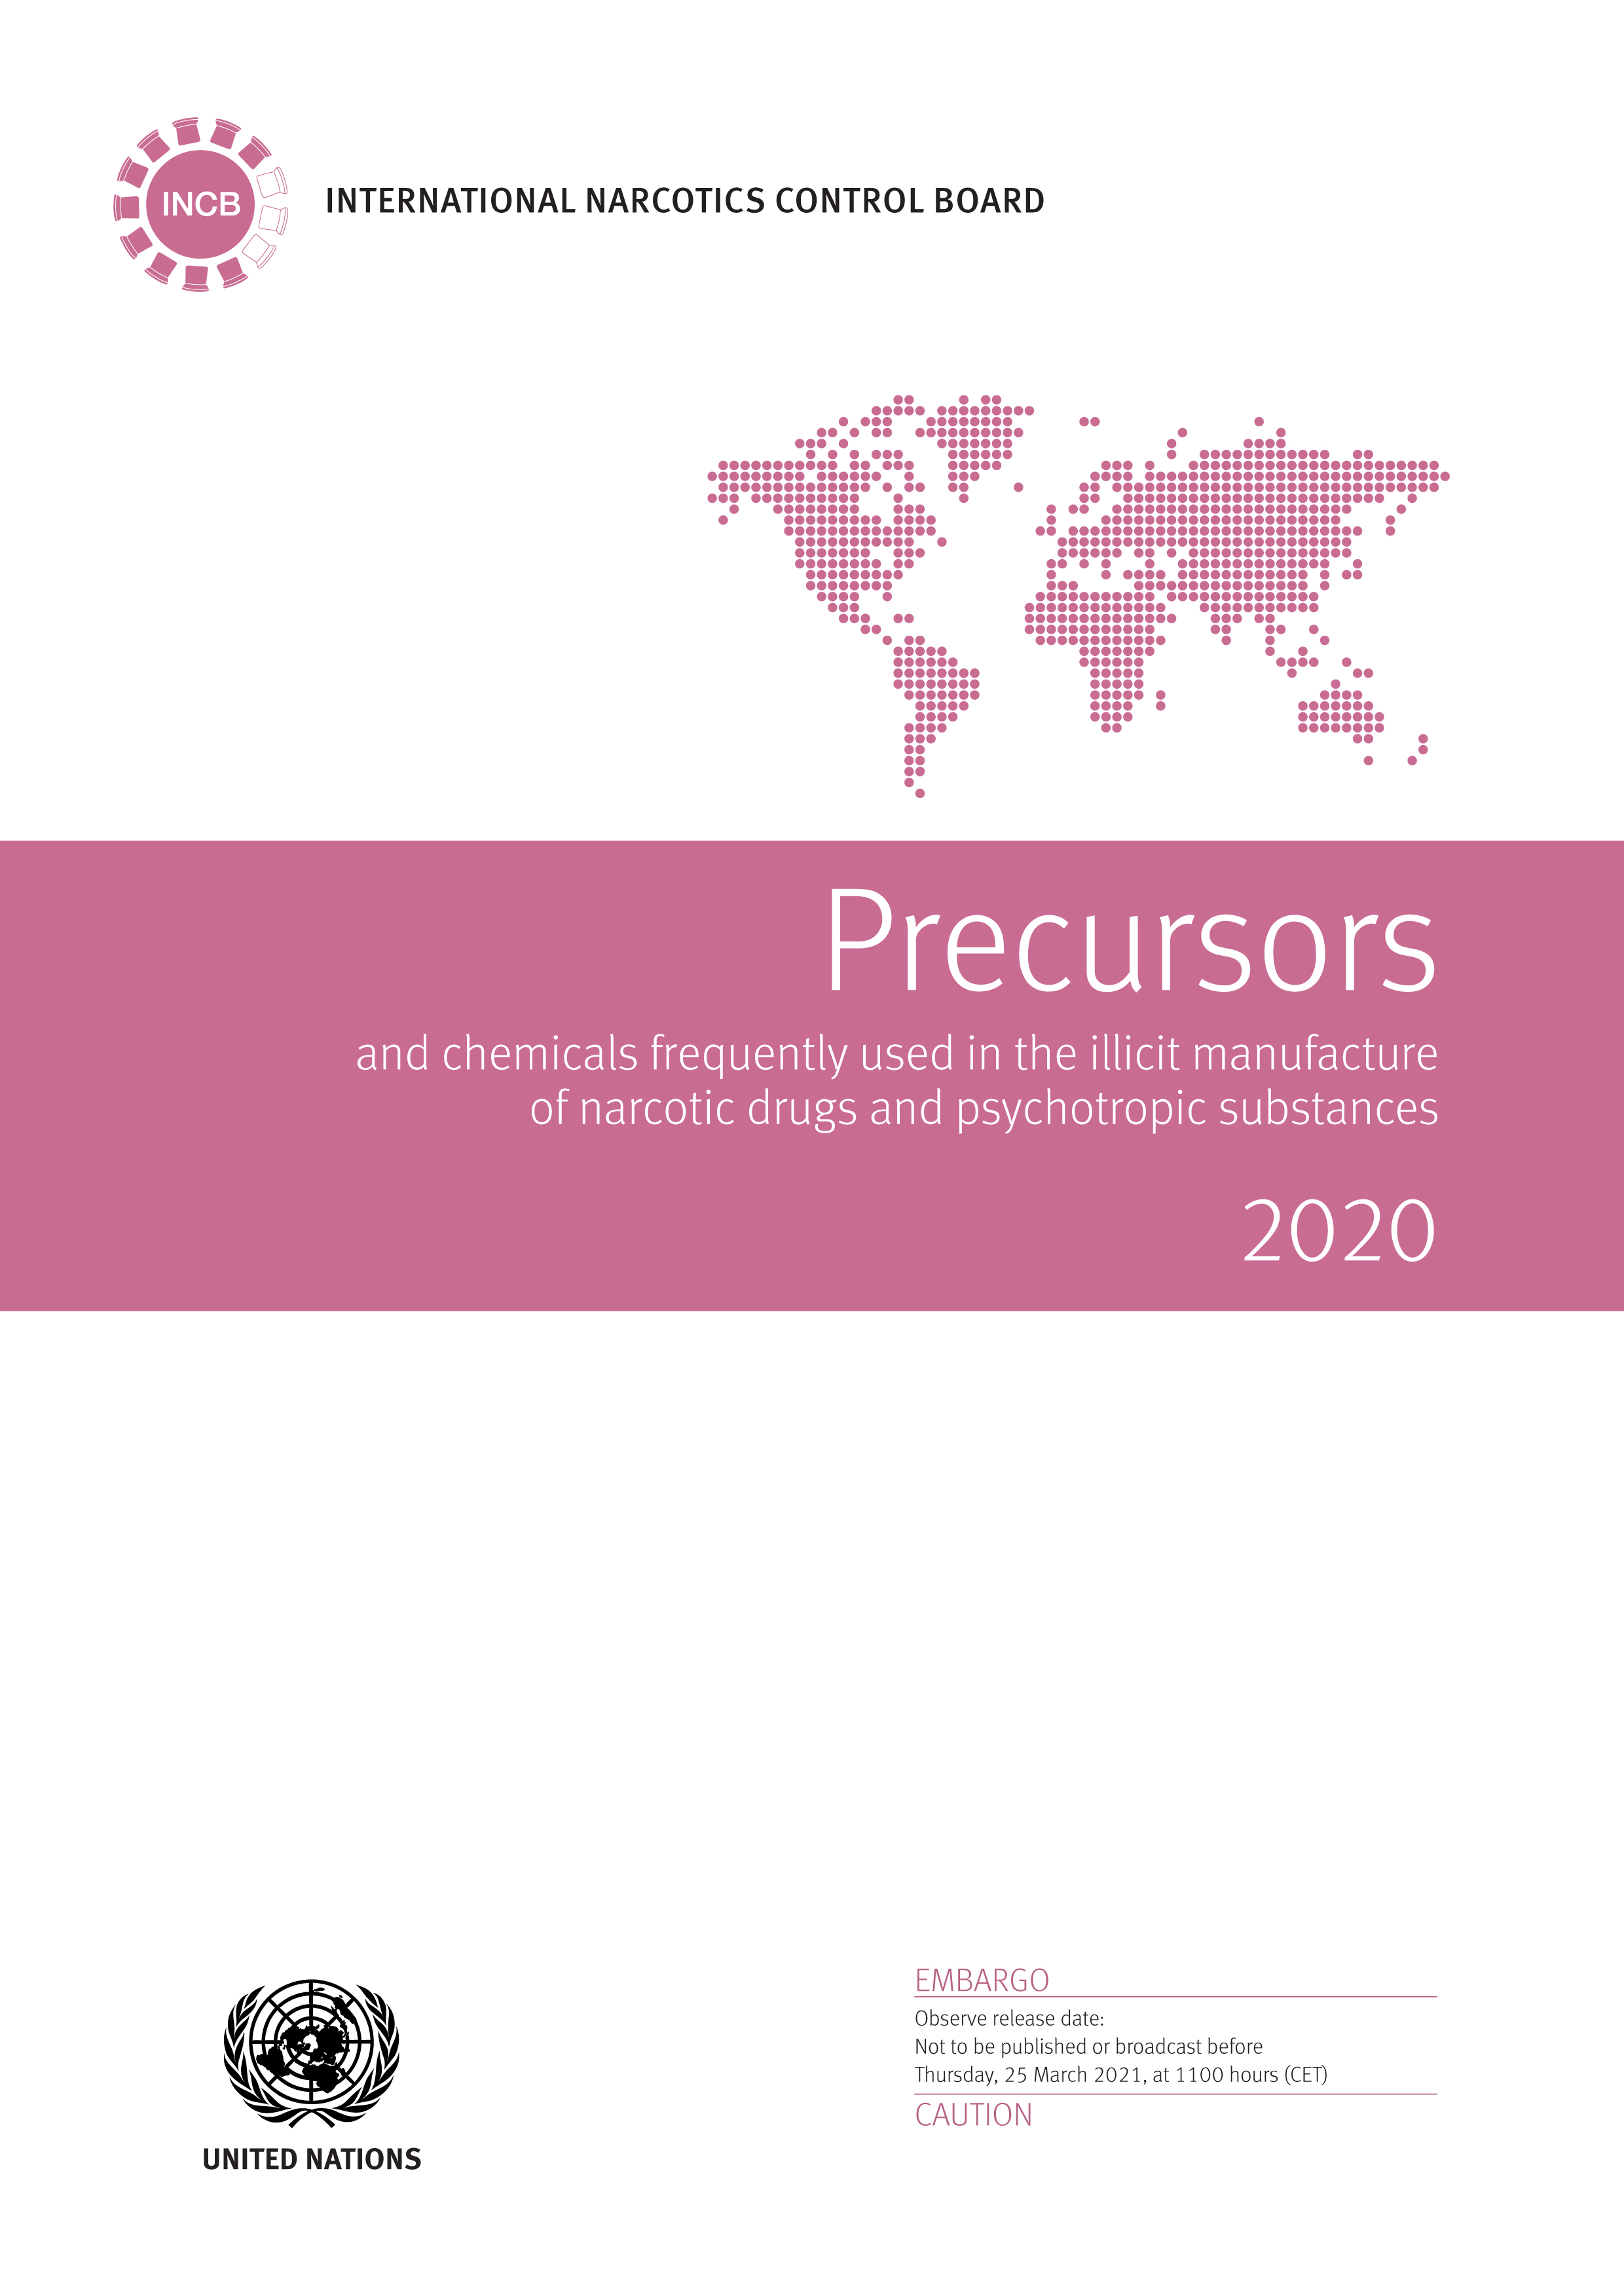 image of Precursors and Chemicals Frequently Used in the Illicit Manufacture of Narcotic Drugs and Psychotropic Substances 2020